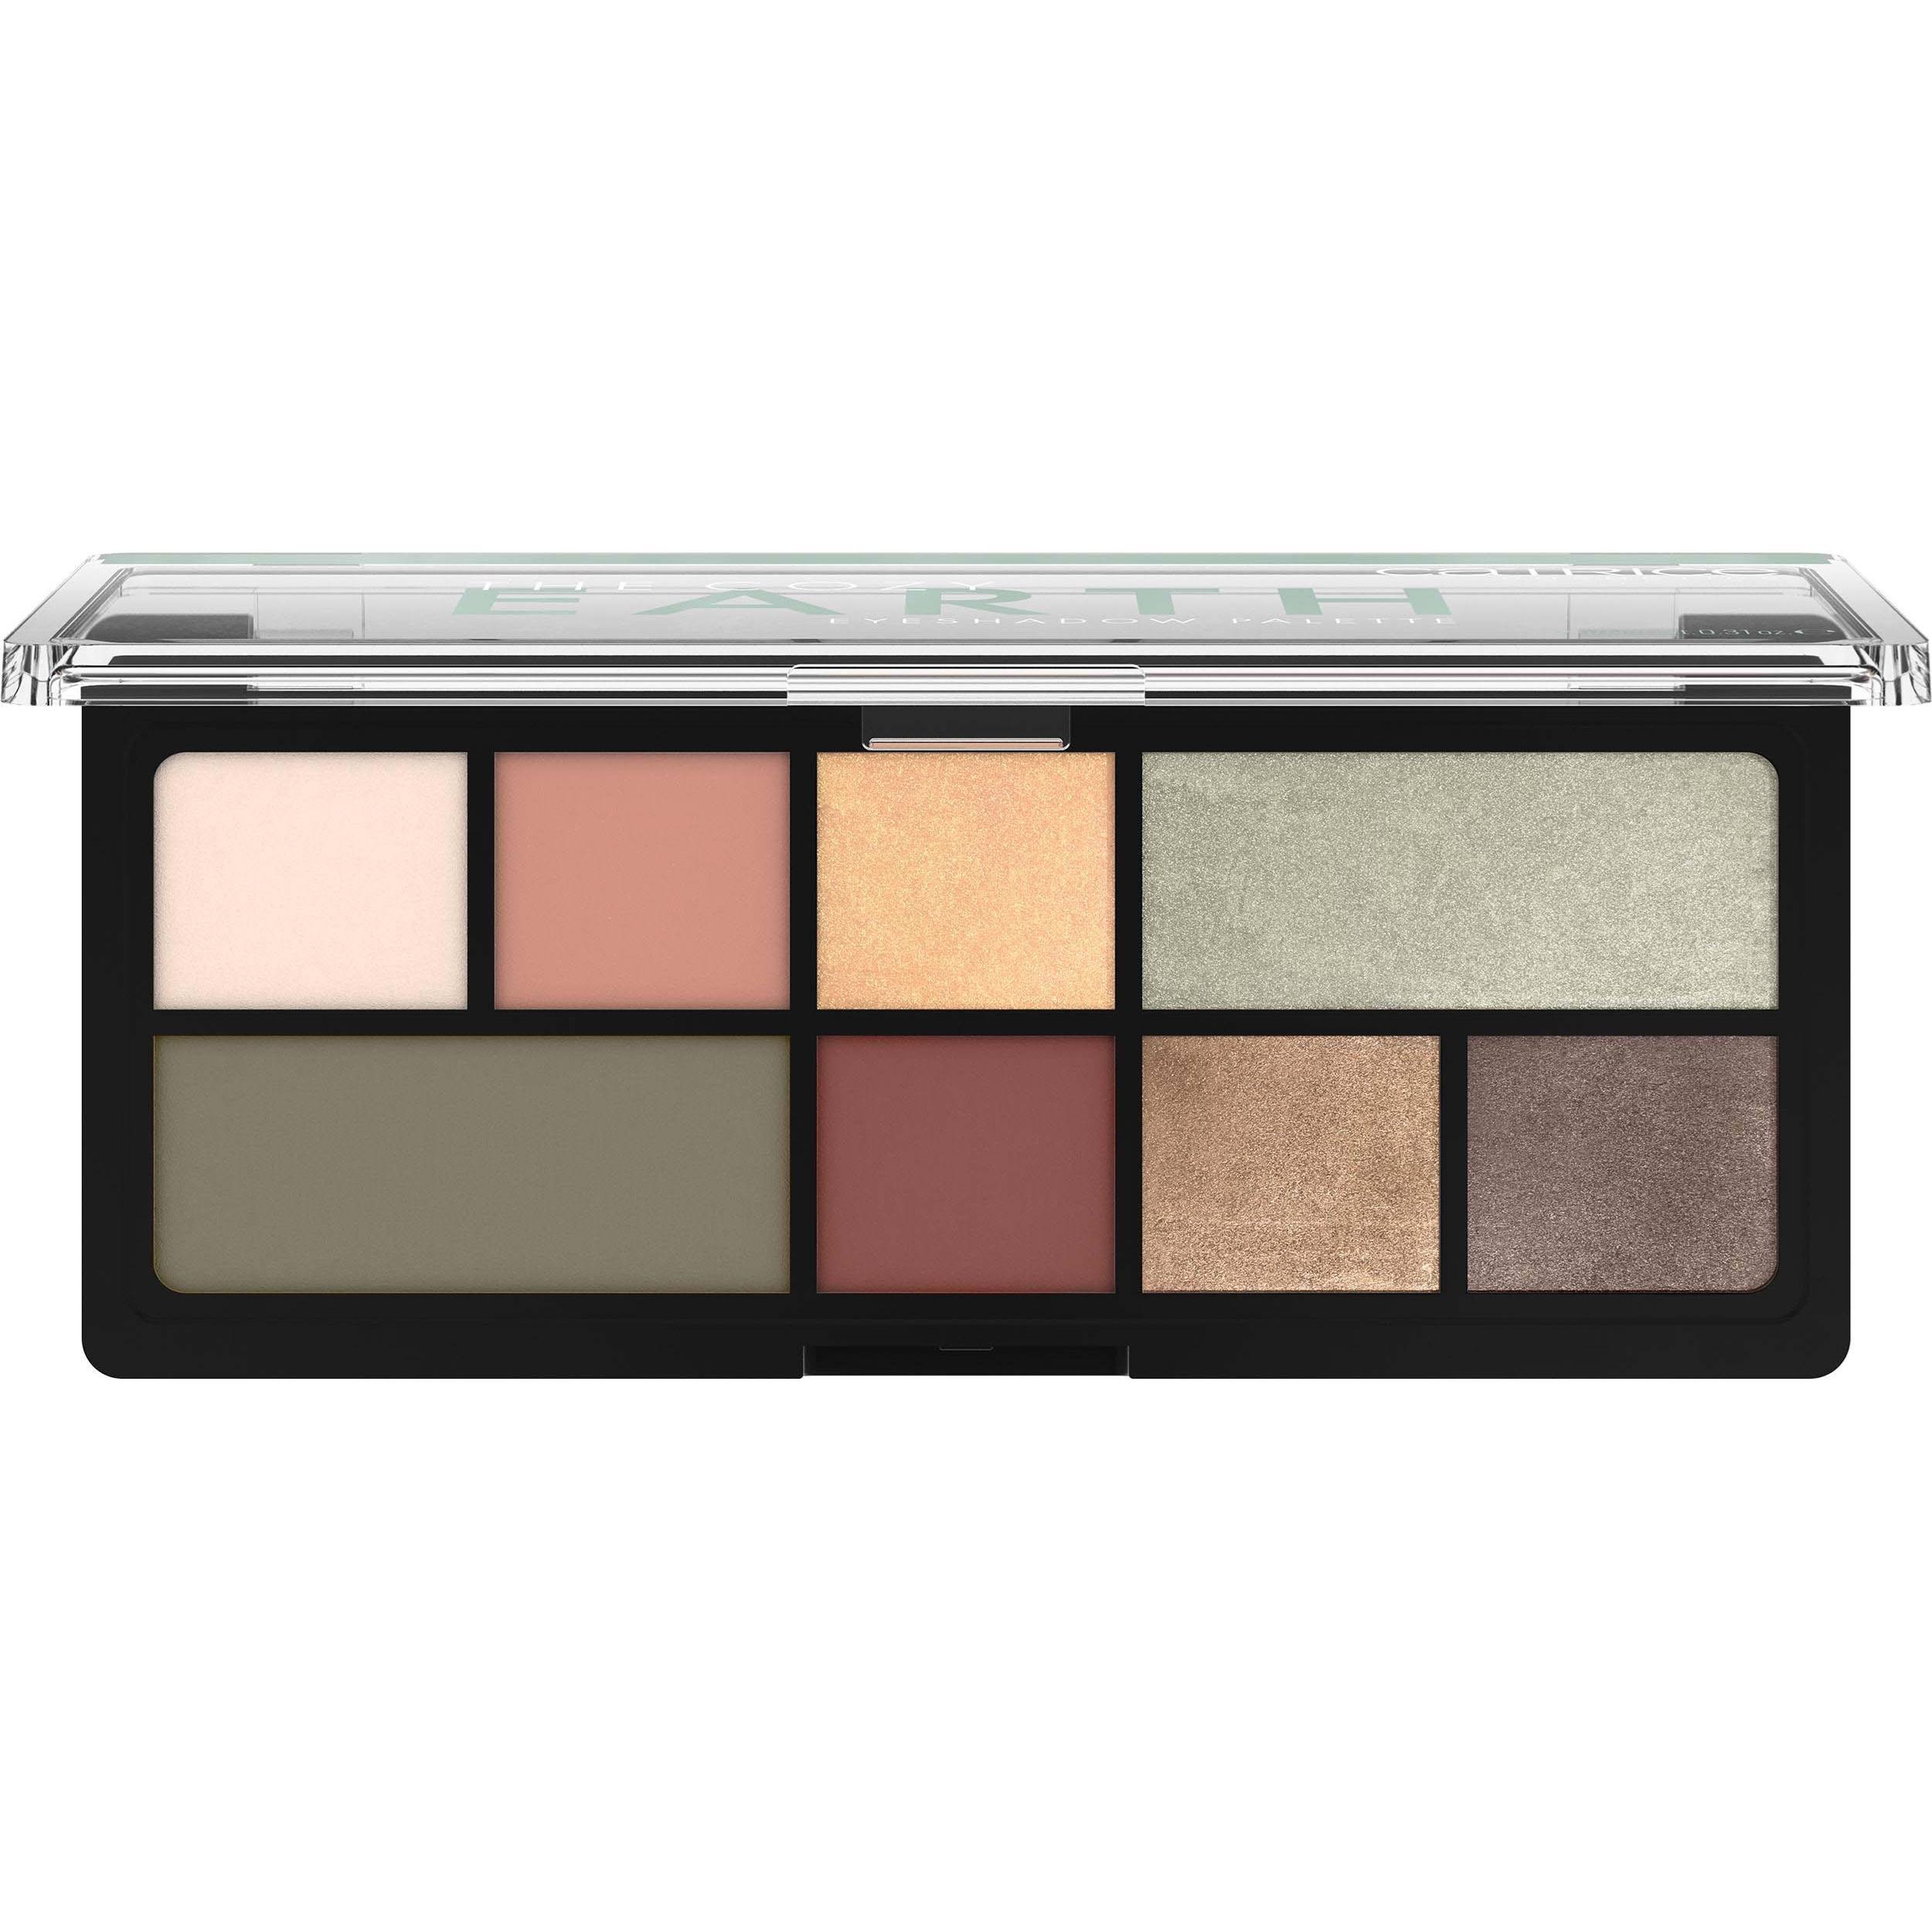 Catrice The Cozy Earth Eyeshadow Palette 9 g